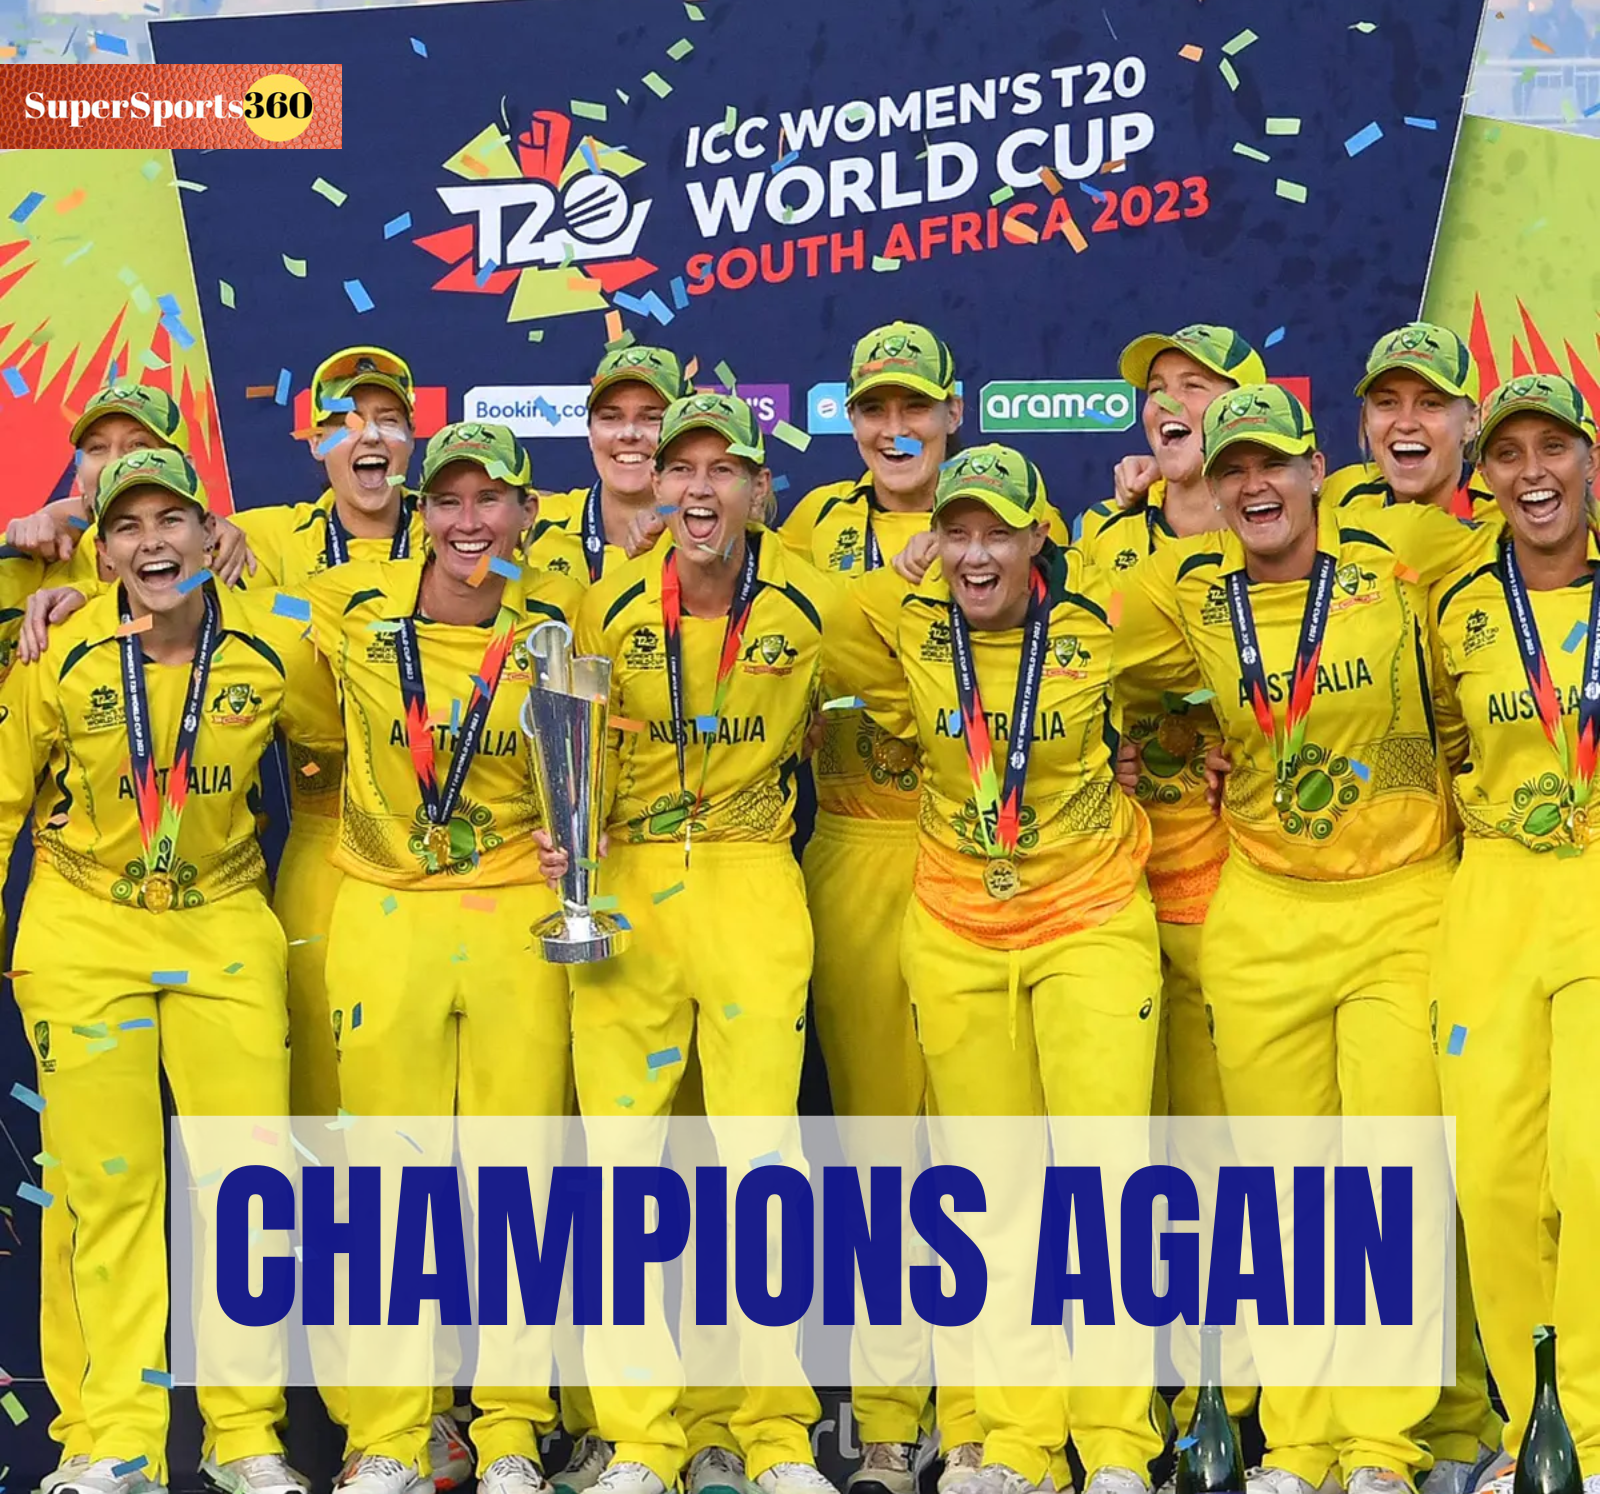 ICC Women’s T20 World Cup: Australians are Champions Again